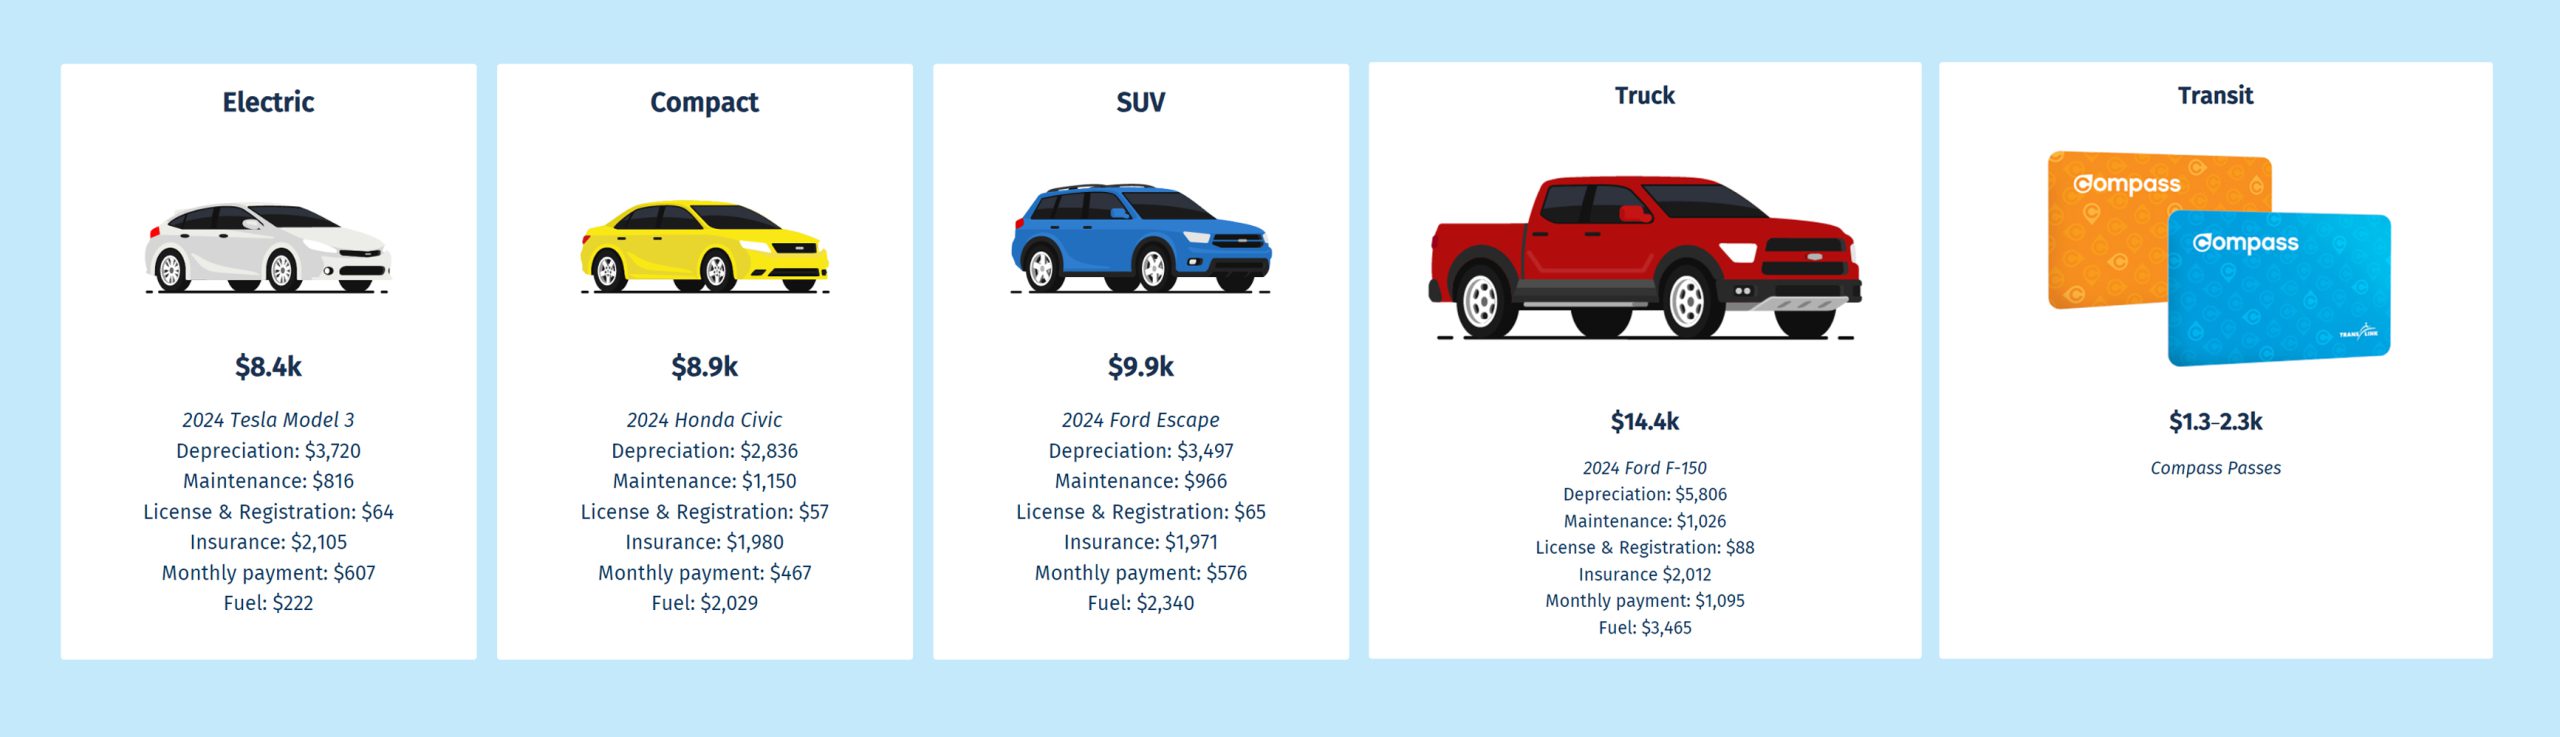 Yearly cost comparison of owning a car versus transit Monthly Passes.